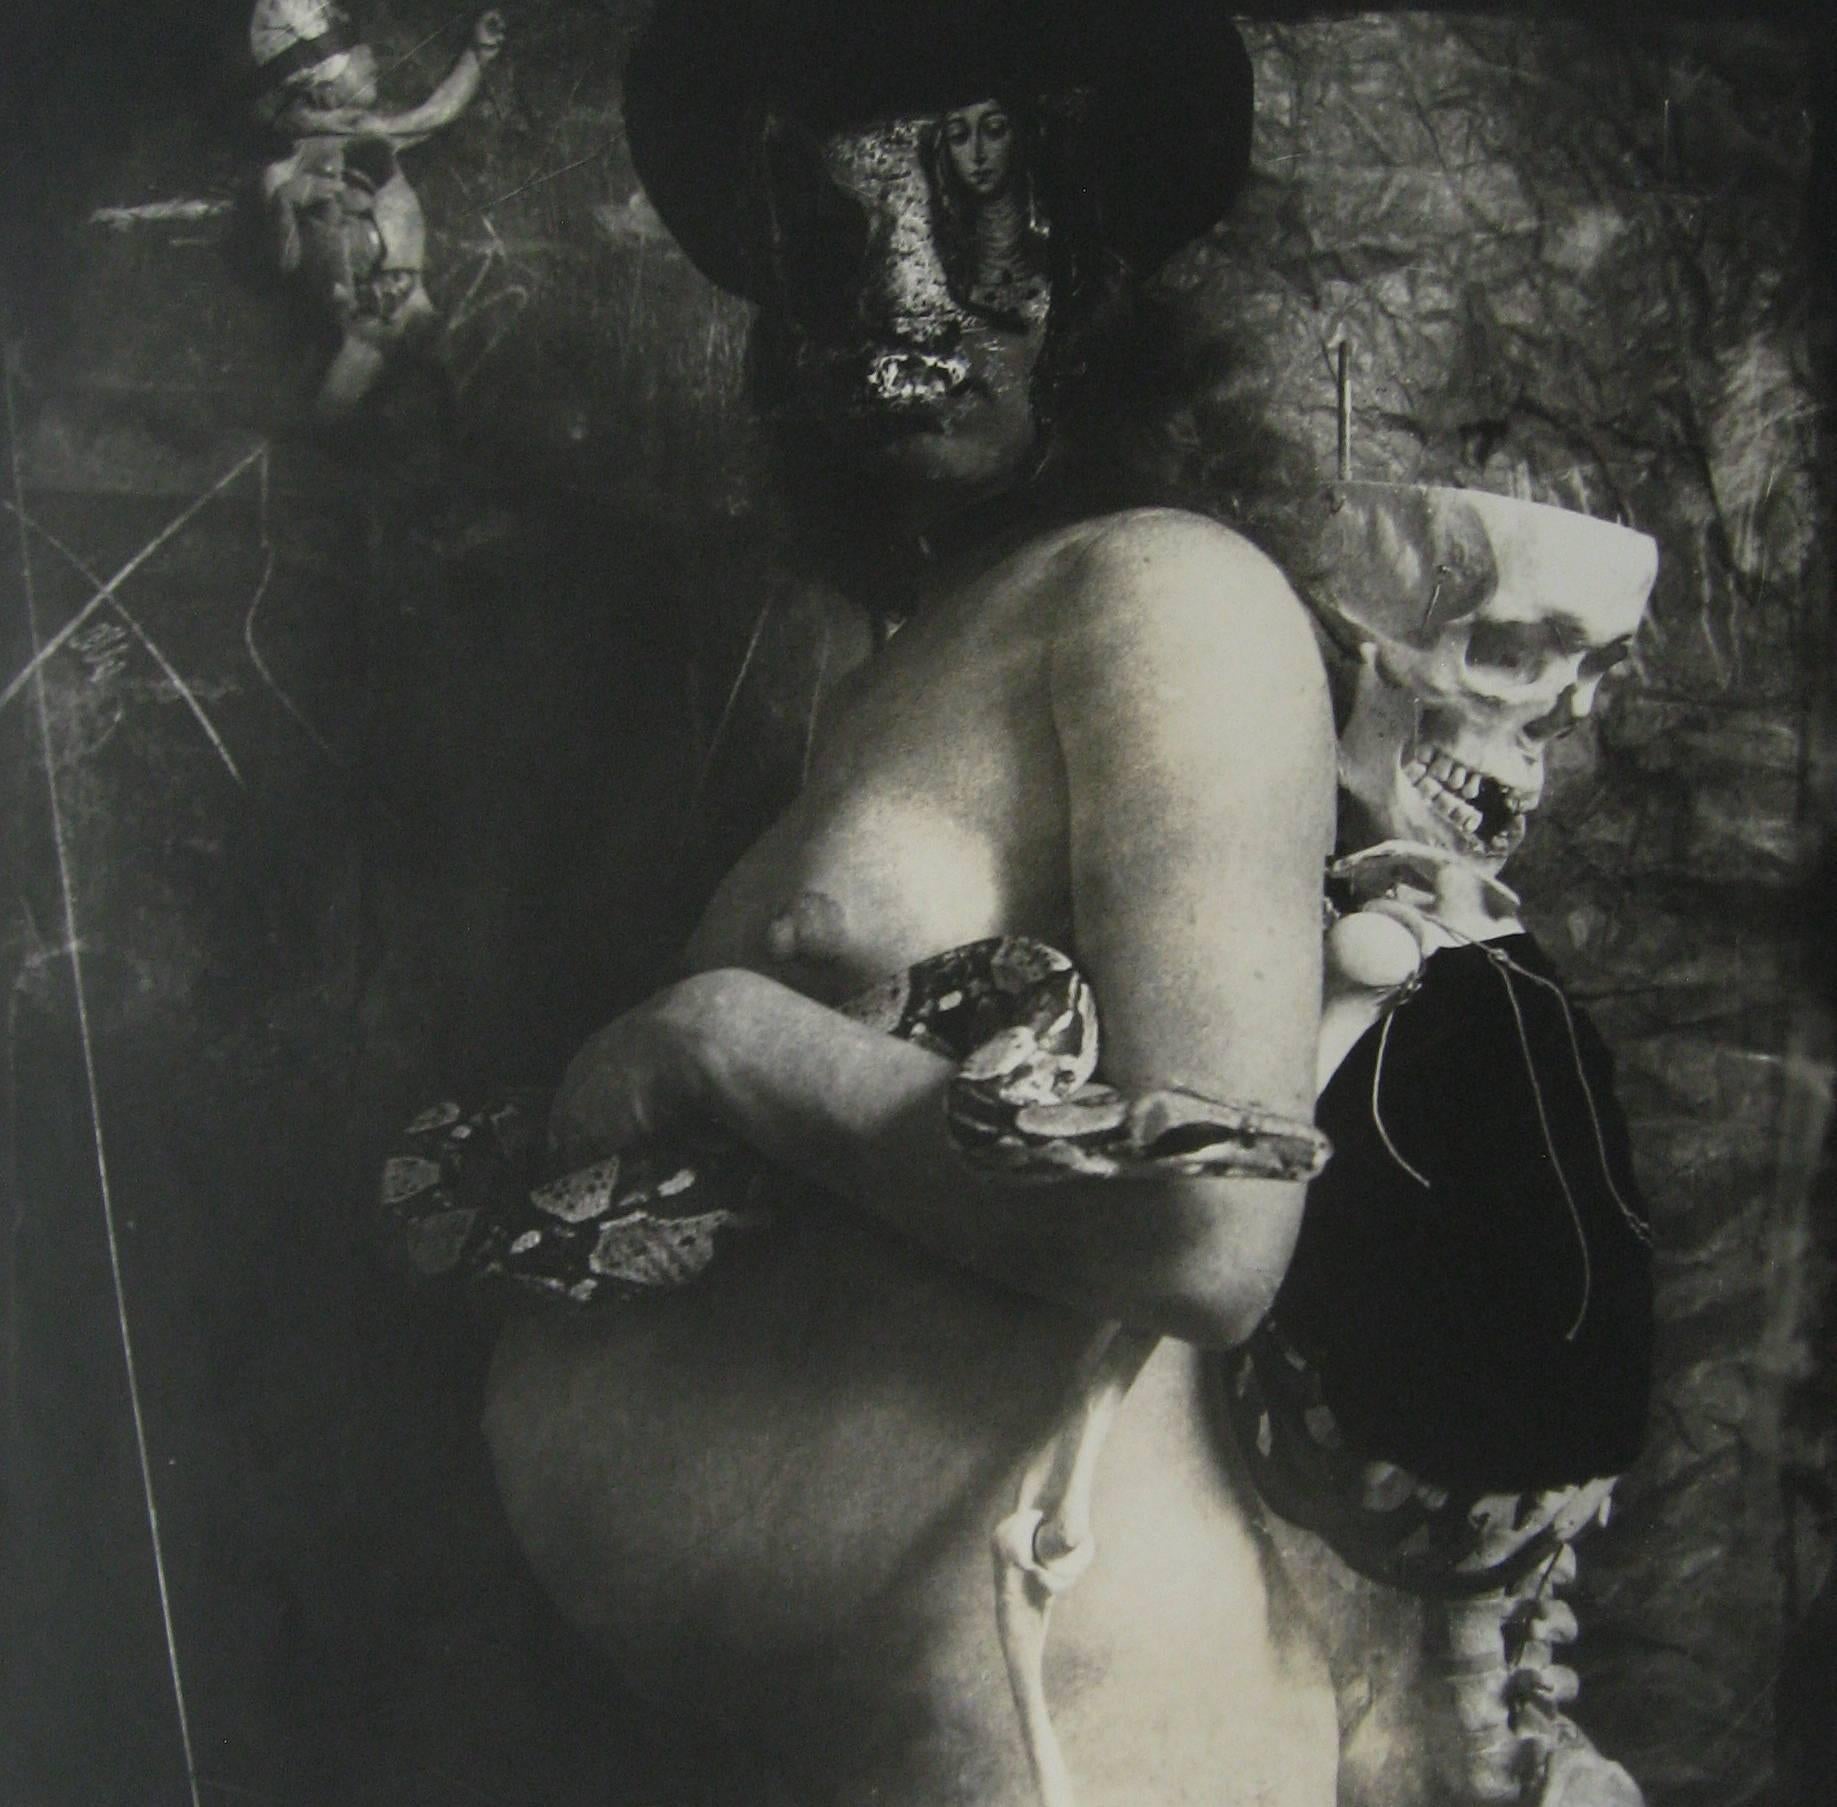 Joel-Peter Witkin Portrait Photograph - The Wife of Cain